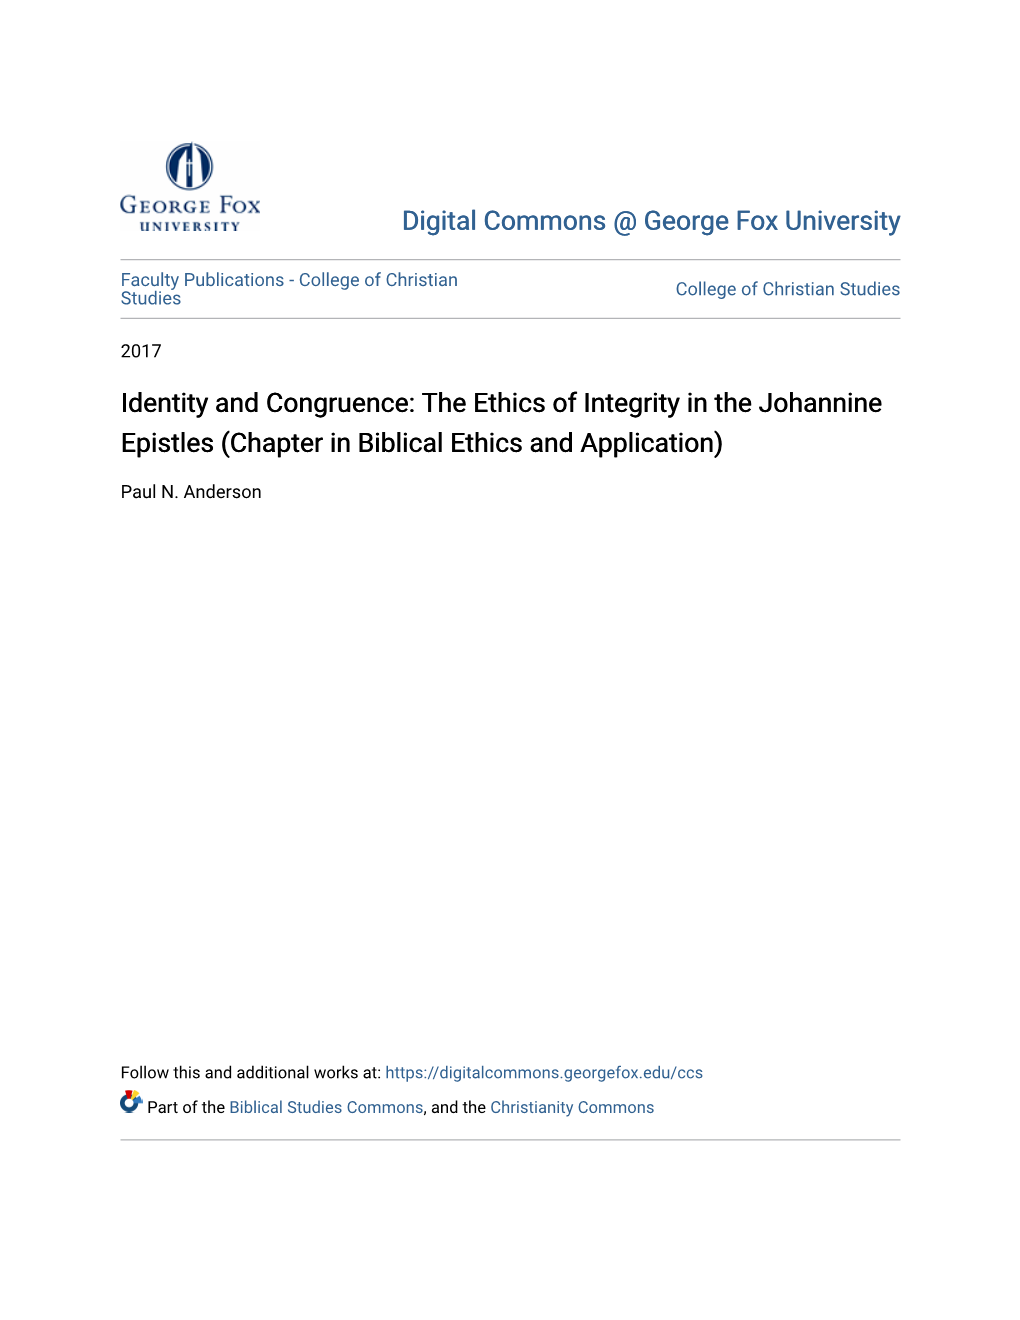 The Ethics of Integrity in the Johannine Epistles (Chapter in Biblical Ethics and Application)